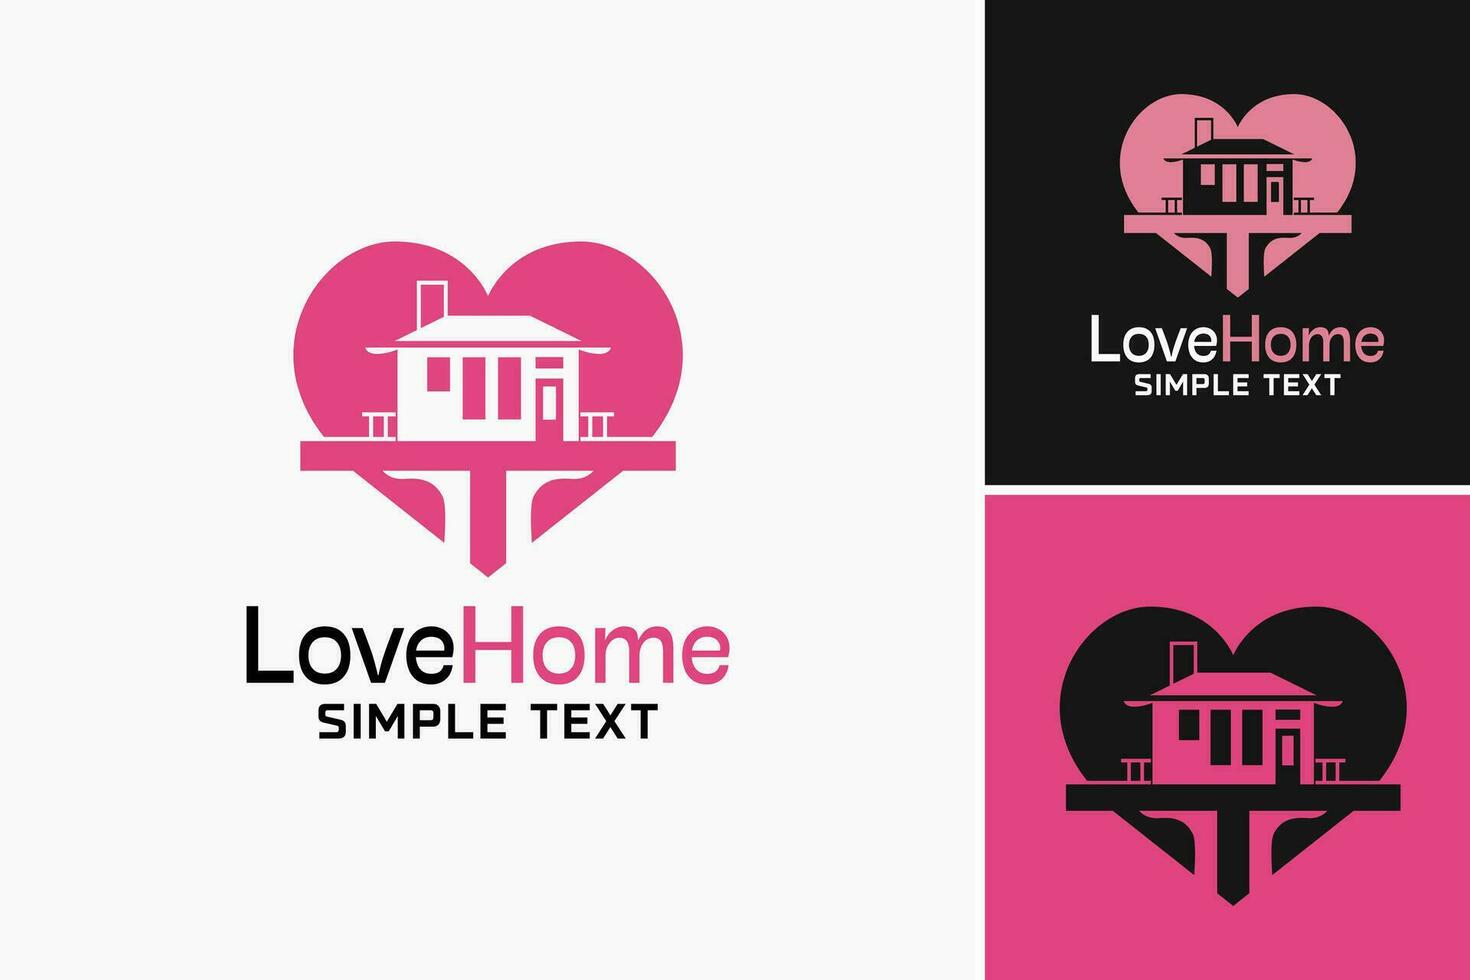 love home logo is a design asset suitable for real estate businesses or interior designers. It represents love and warmth in one's home. vector